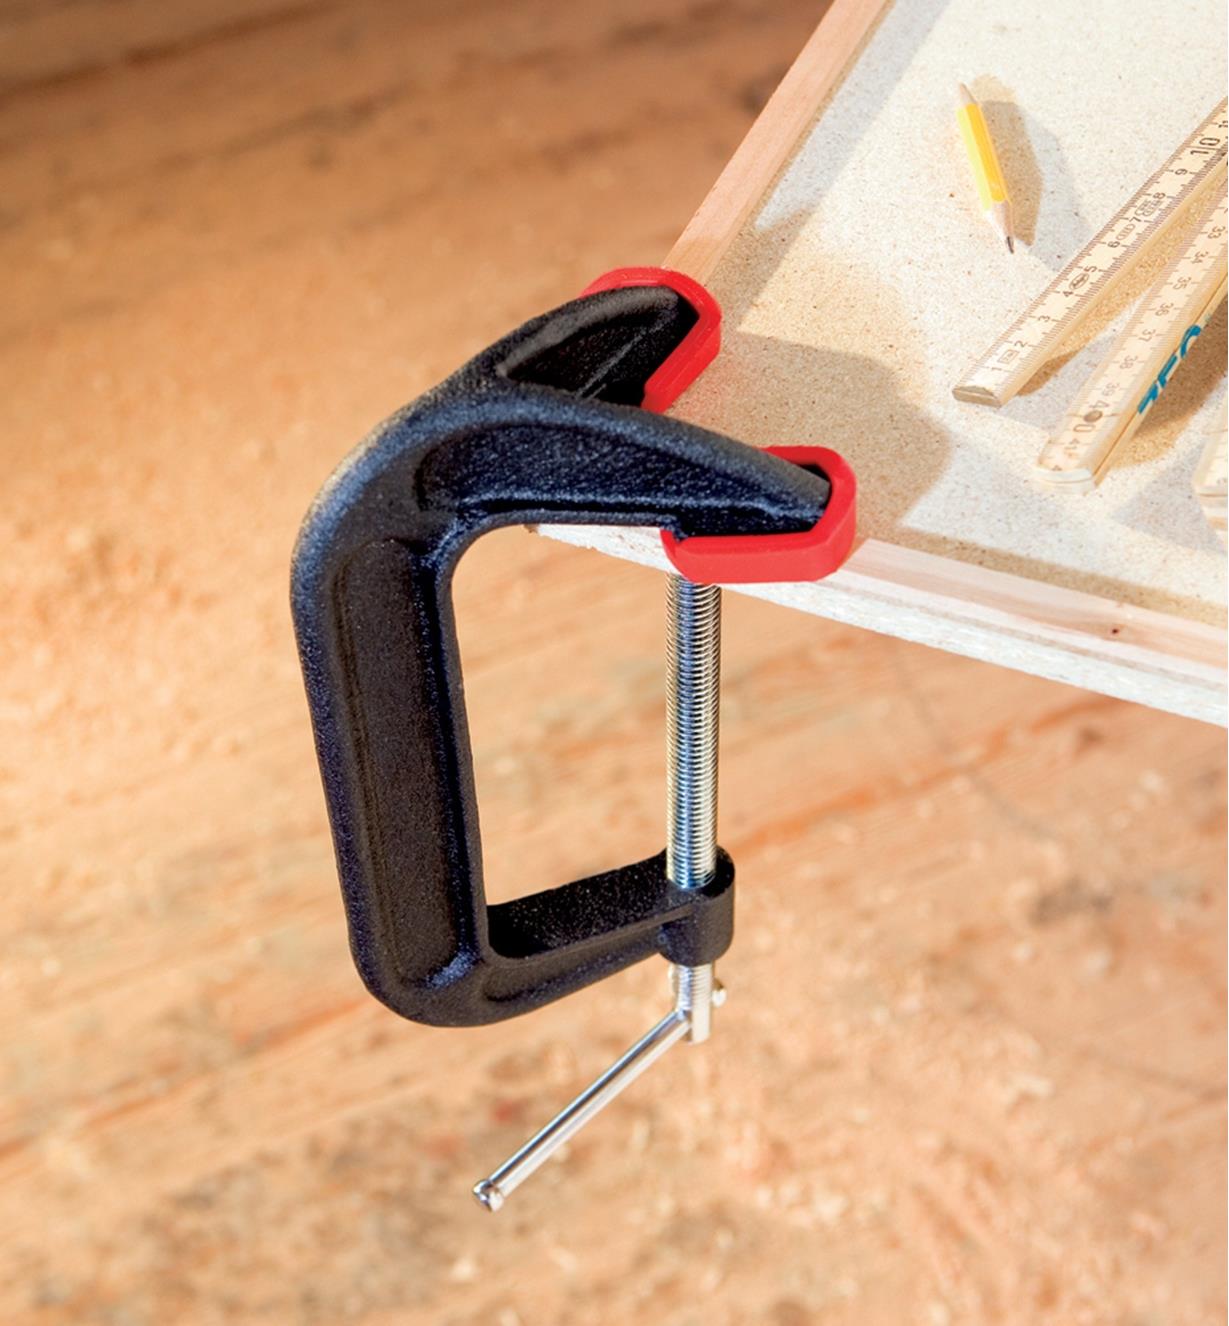 A Bessey double-jaw C-clamp used to clamp the mitered corner of a picture frame